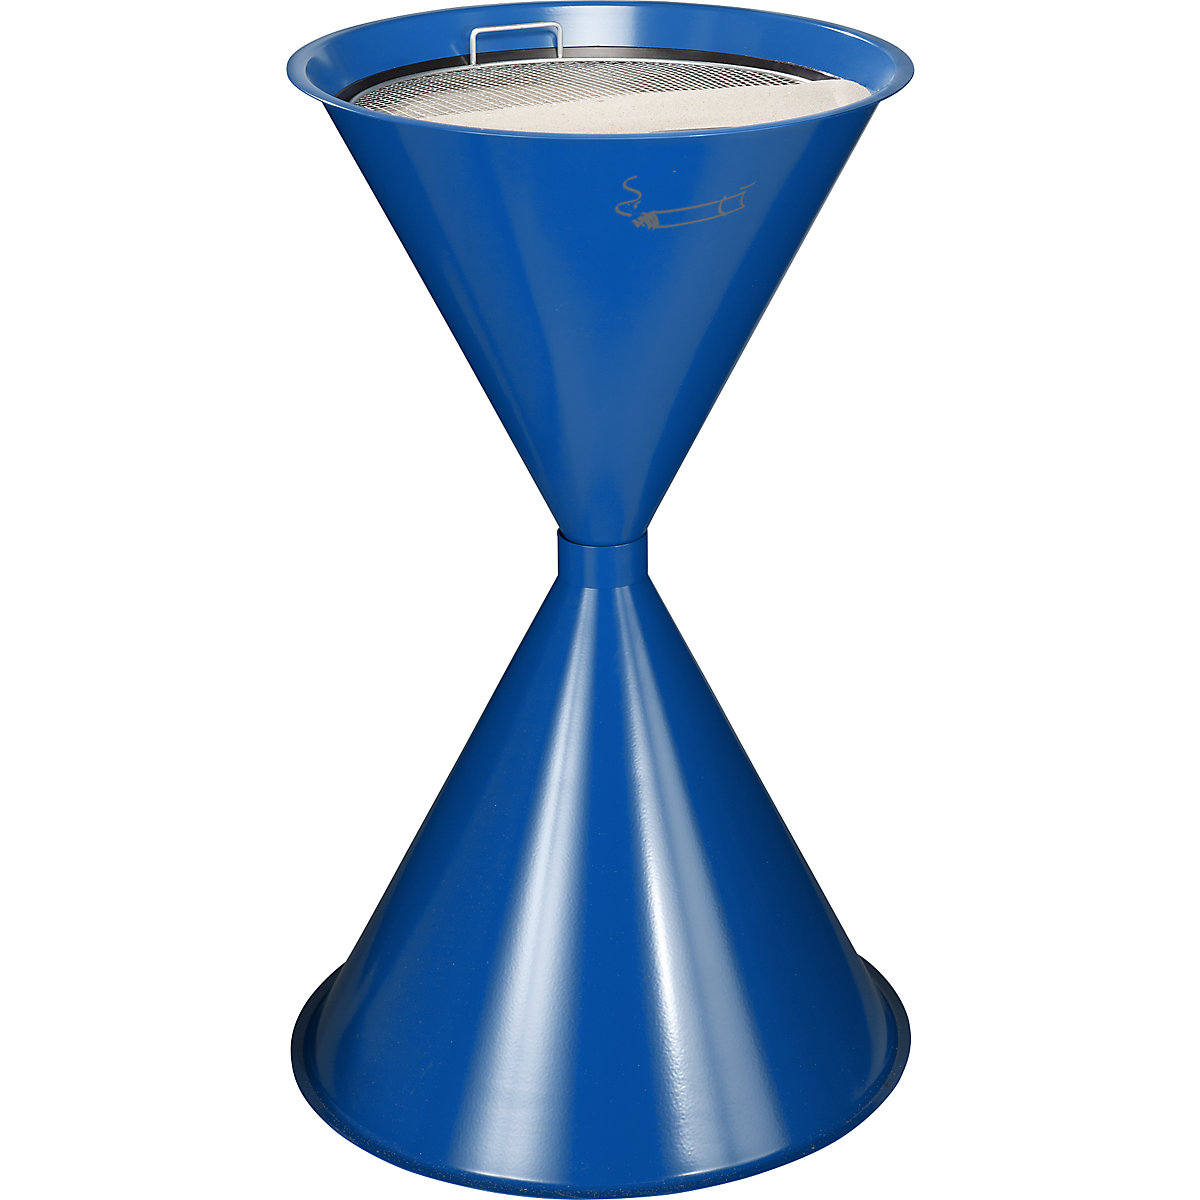 VAR – Conical ashtray made of metal, sheet steel, powder coated, gentian blue